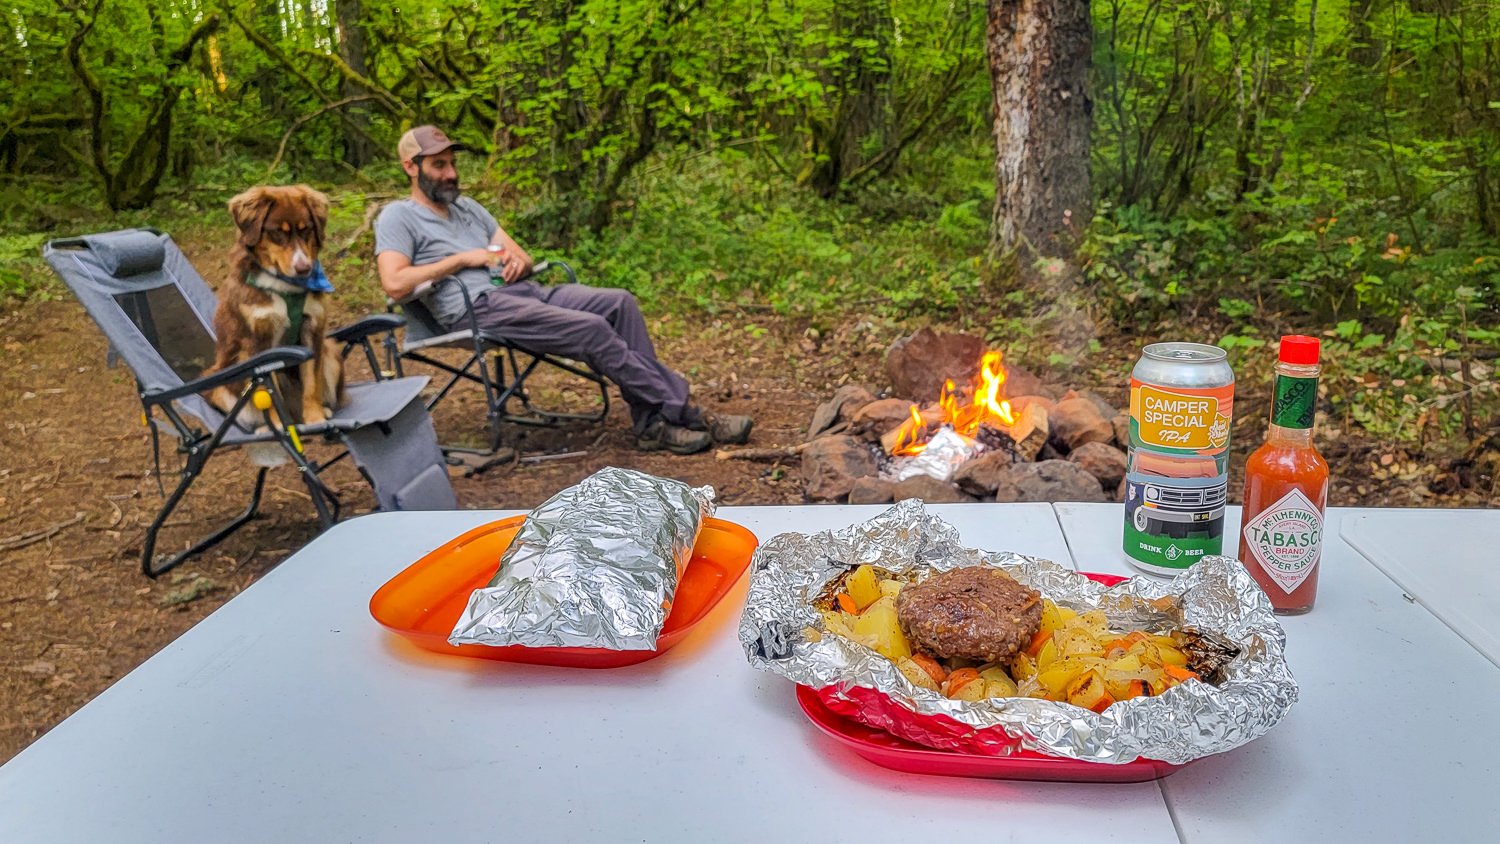 Closeup of a classic foil packet meal with a man and a dog sitting around a campfire in the background